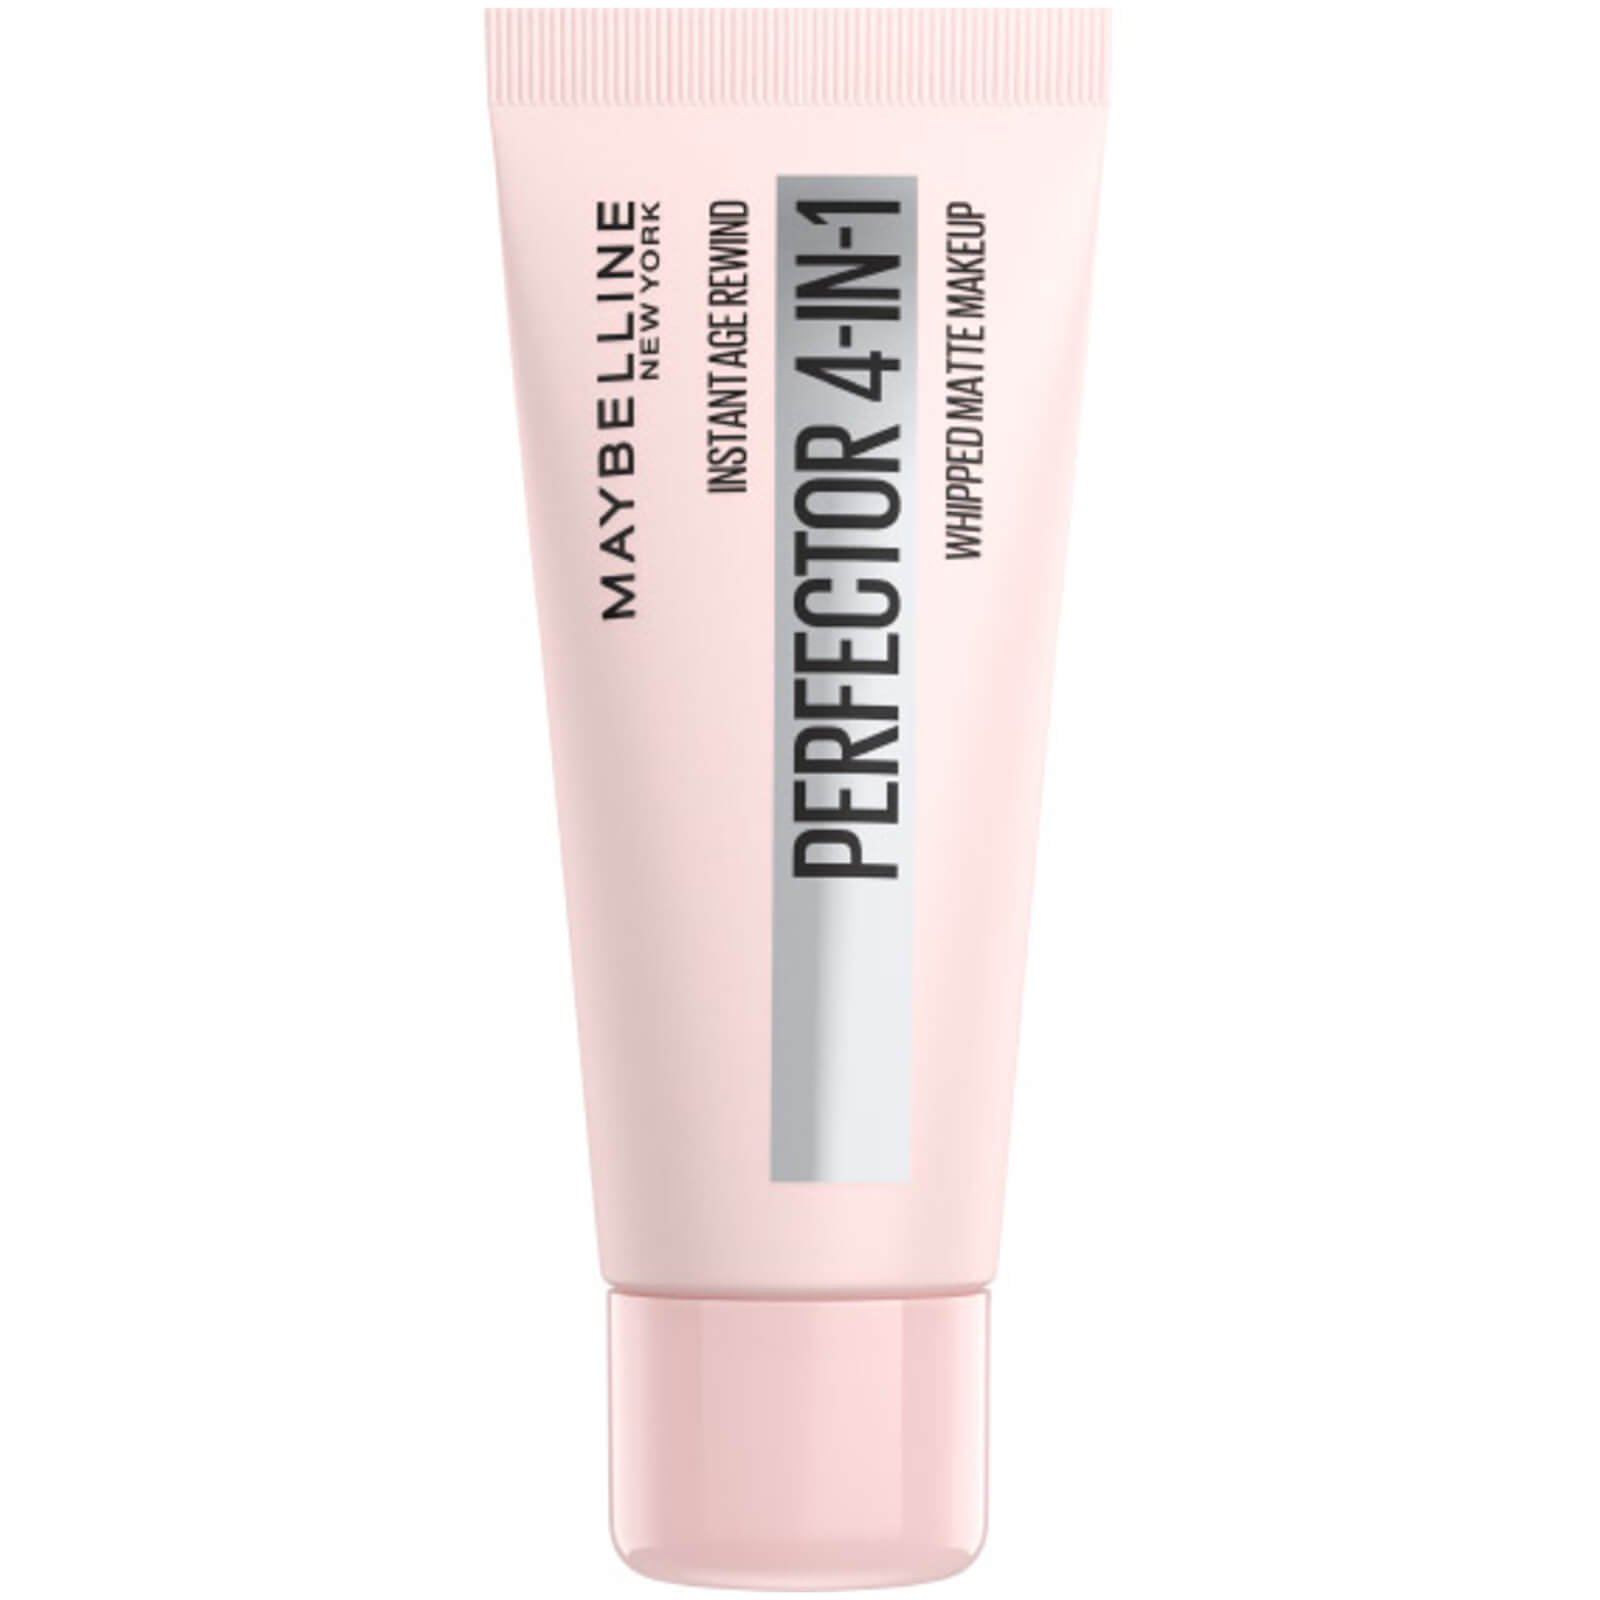 Maybelline Instant Age Rewind Instant Perfector 4-in-1 20ml (Various Shades) - Fair Light